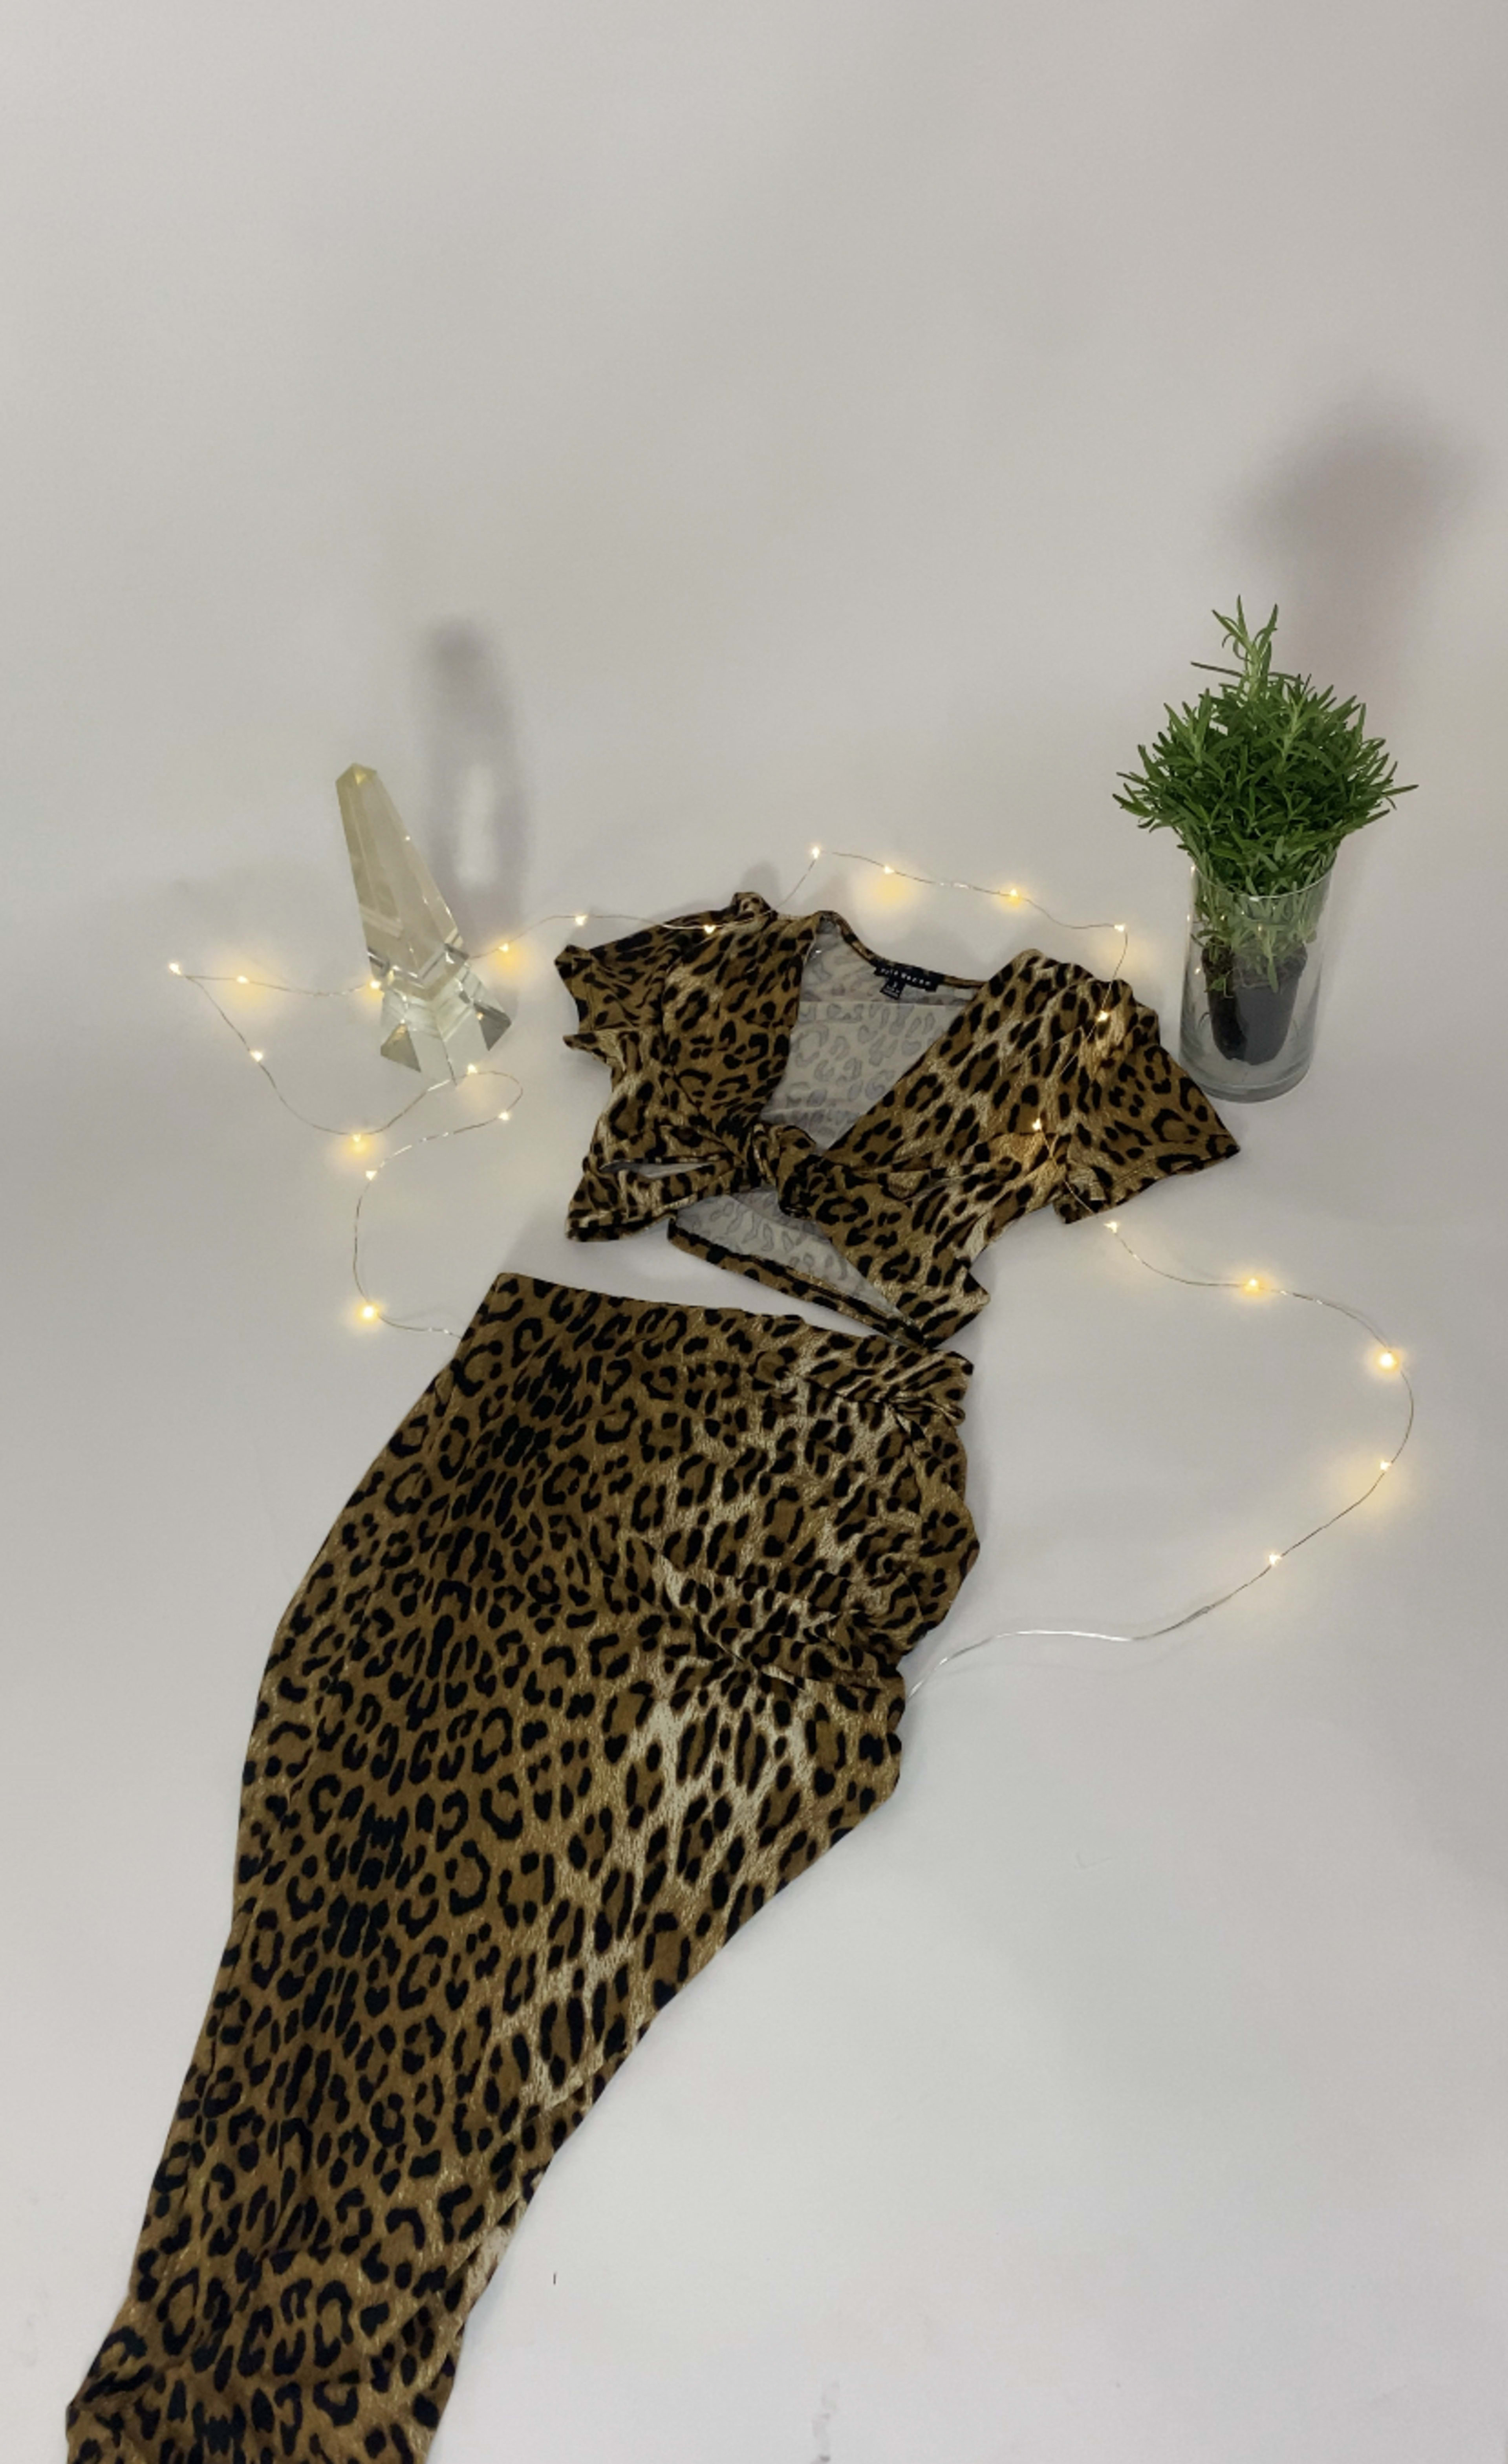 A leopard dress lying next to a potted plant on a brown floor for a product photoshoot.